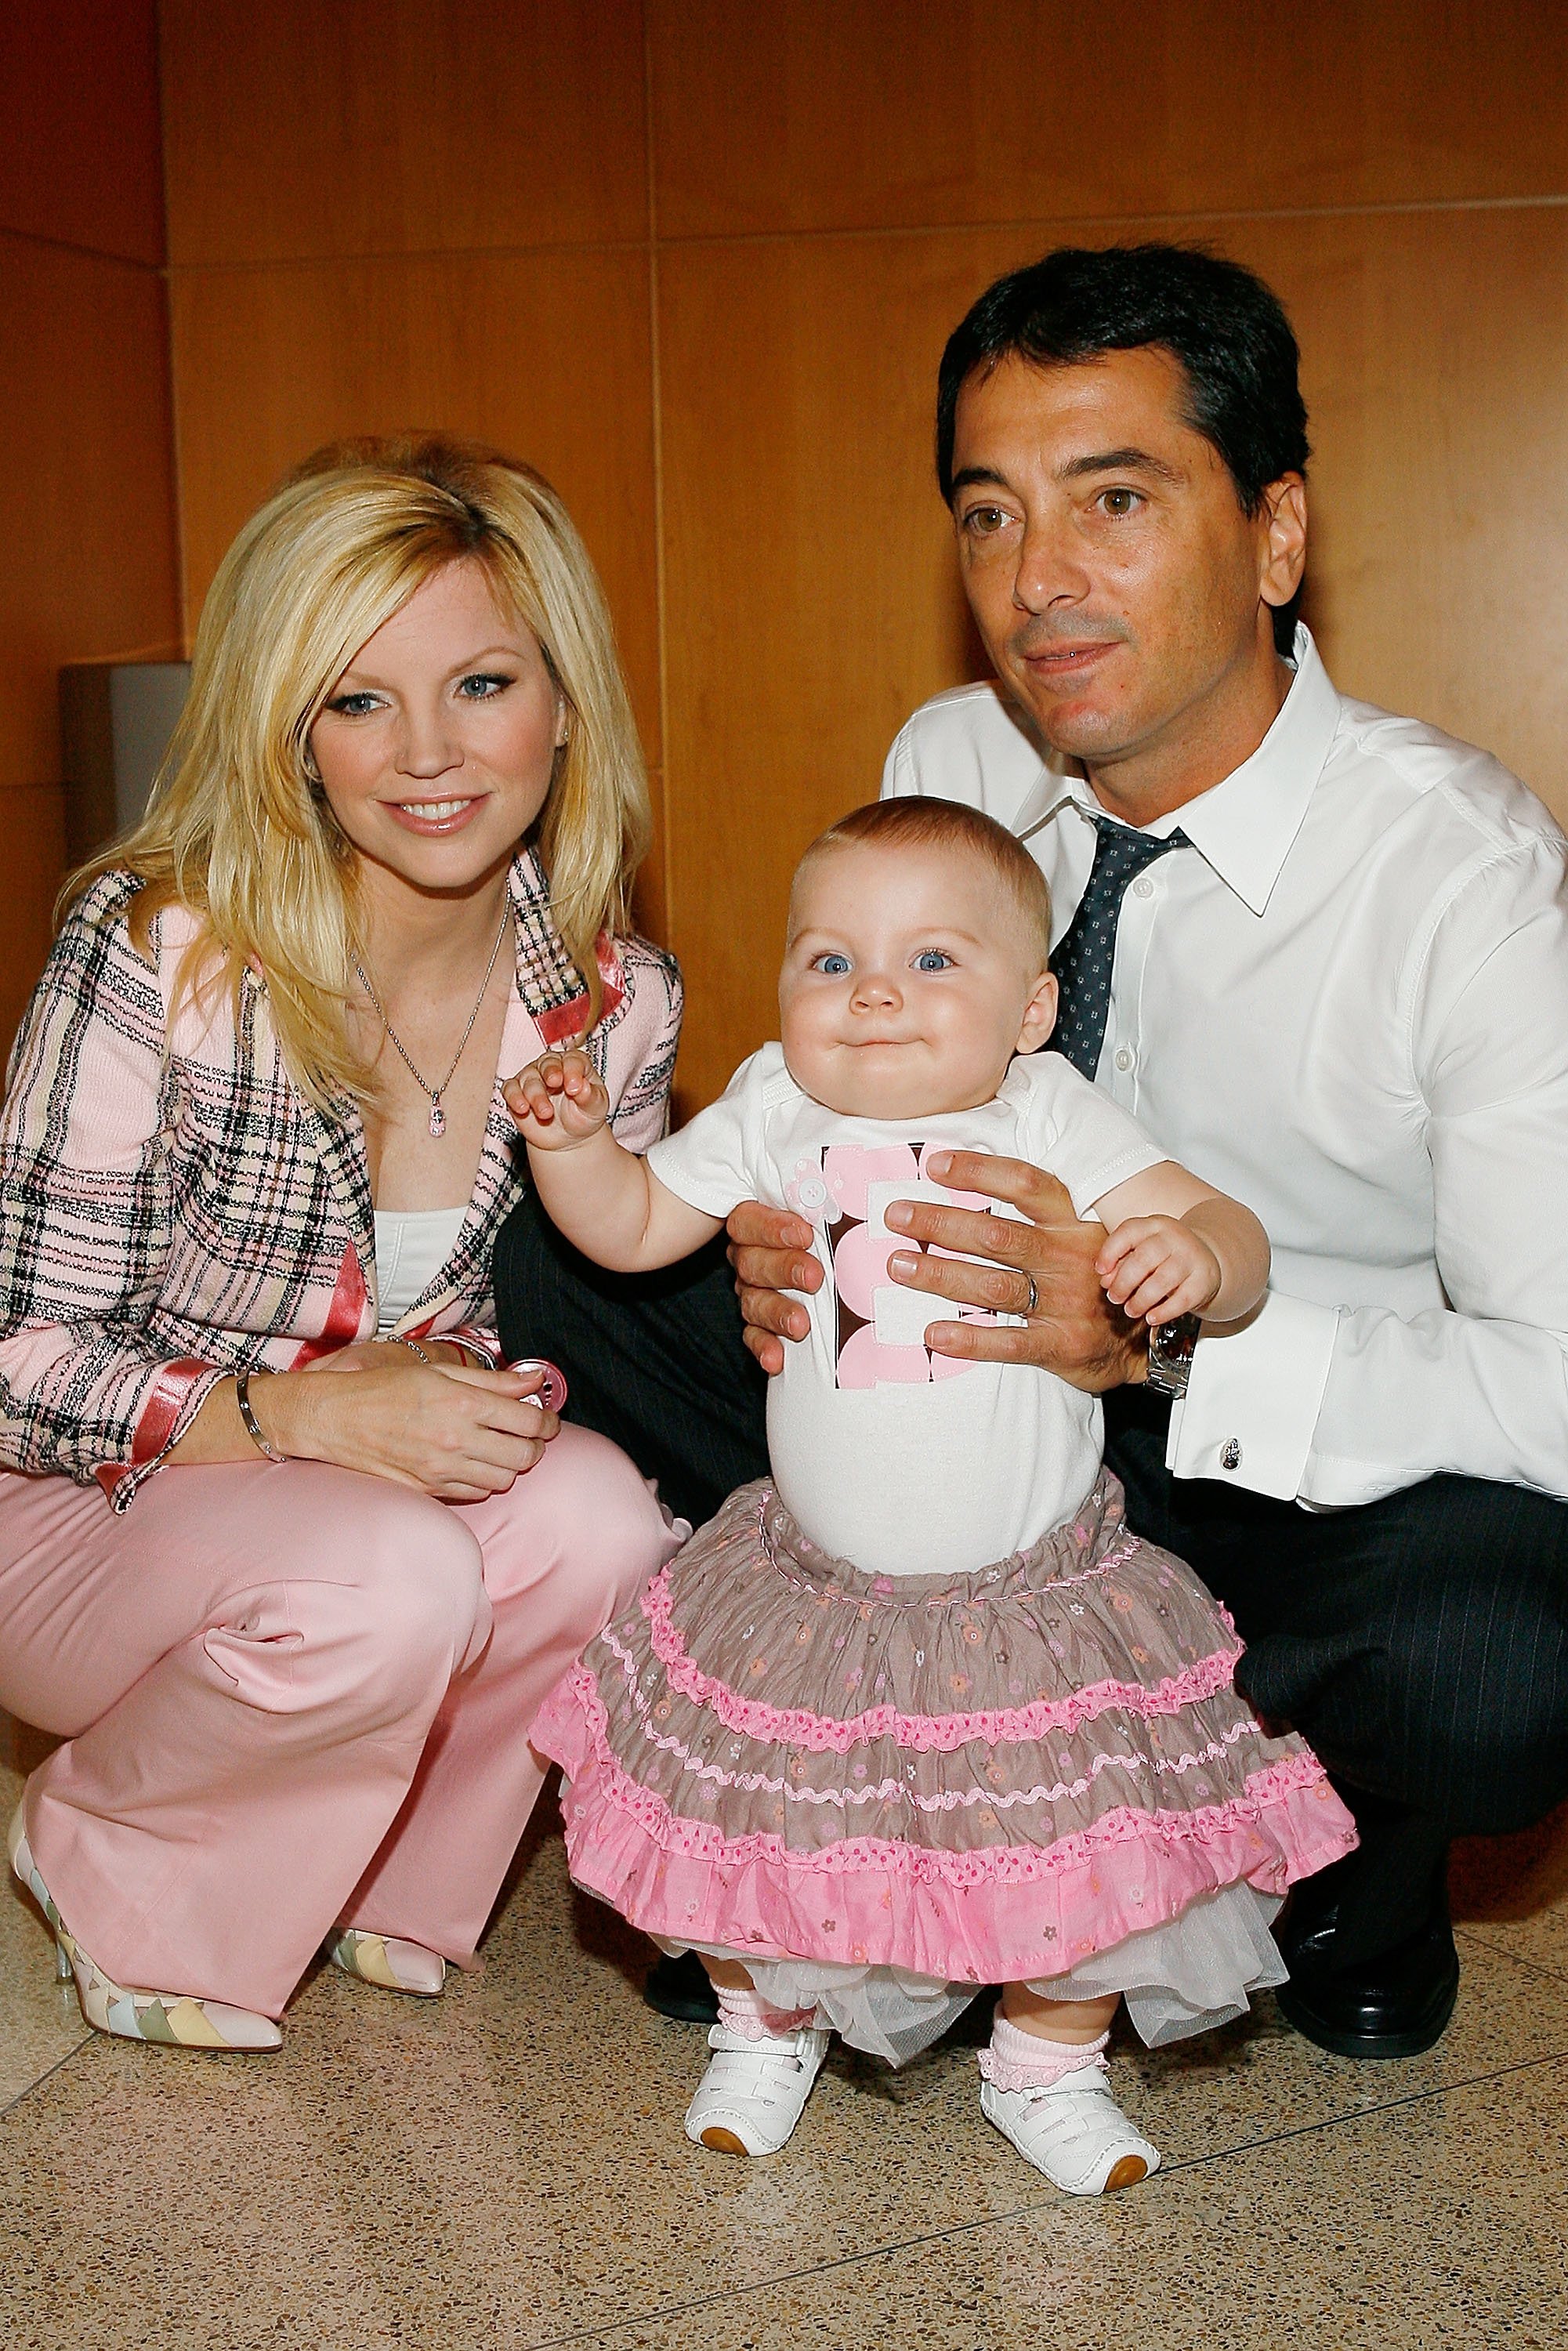 Scott Baio and Renee Baio with their daughter Bailey at a press conference to kickoff the National Newborn Screening Awareness Month in 2008, at the Mattell Children's Hospital UCLA in Westwood, California. | Source: Getty Images 